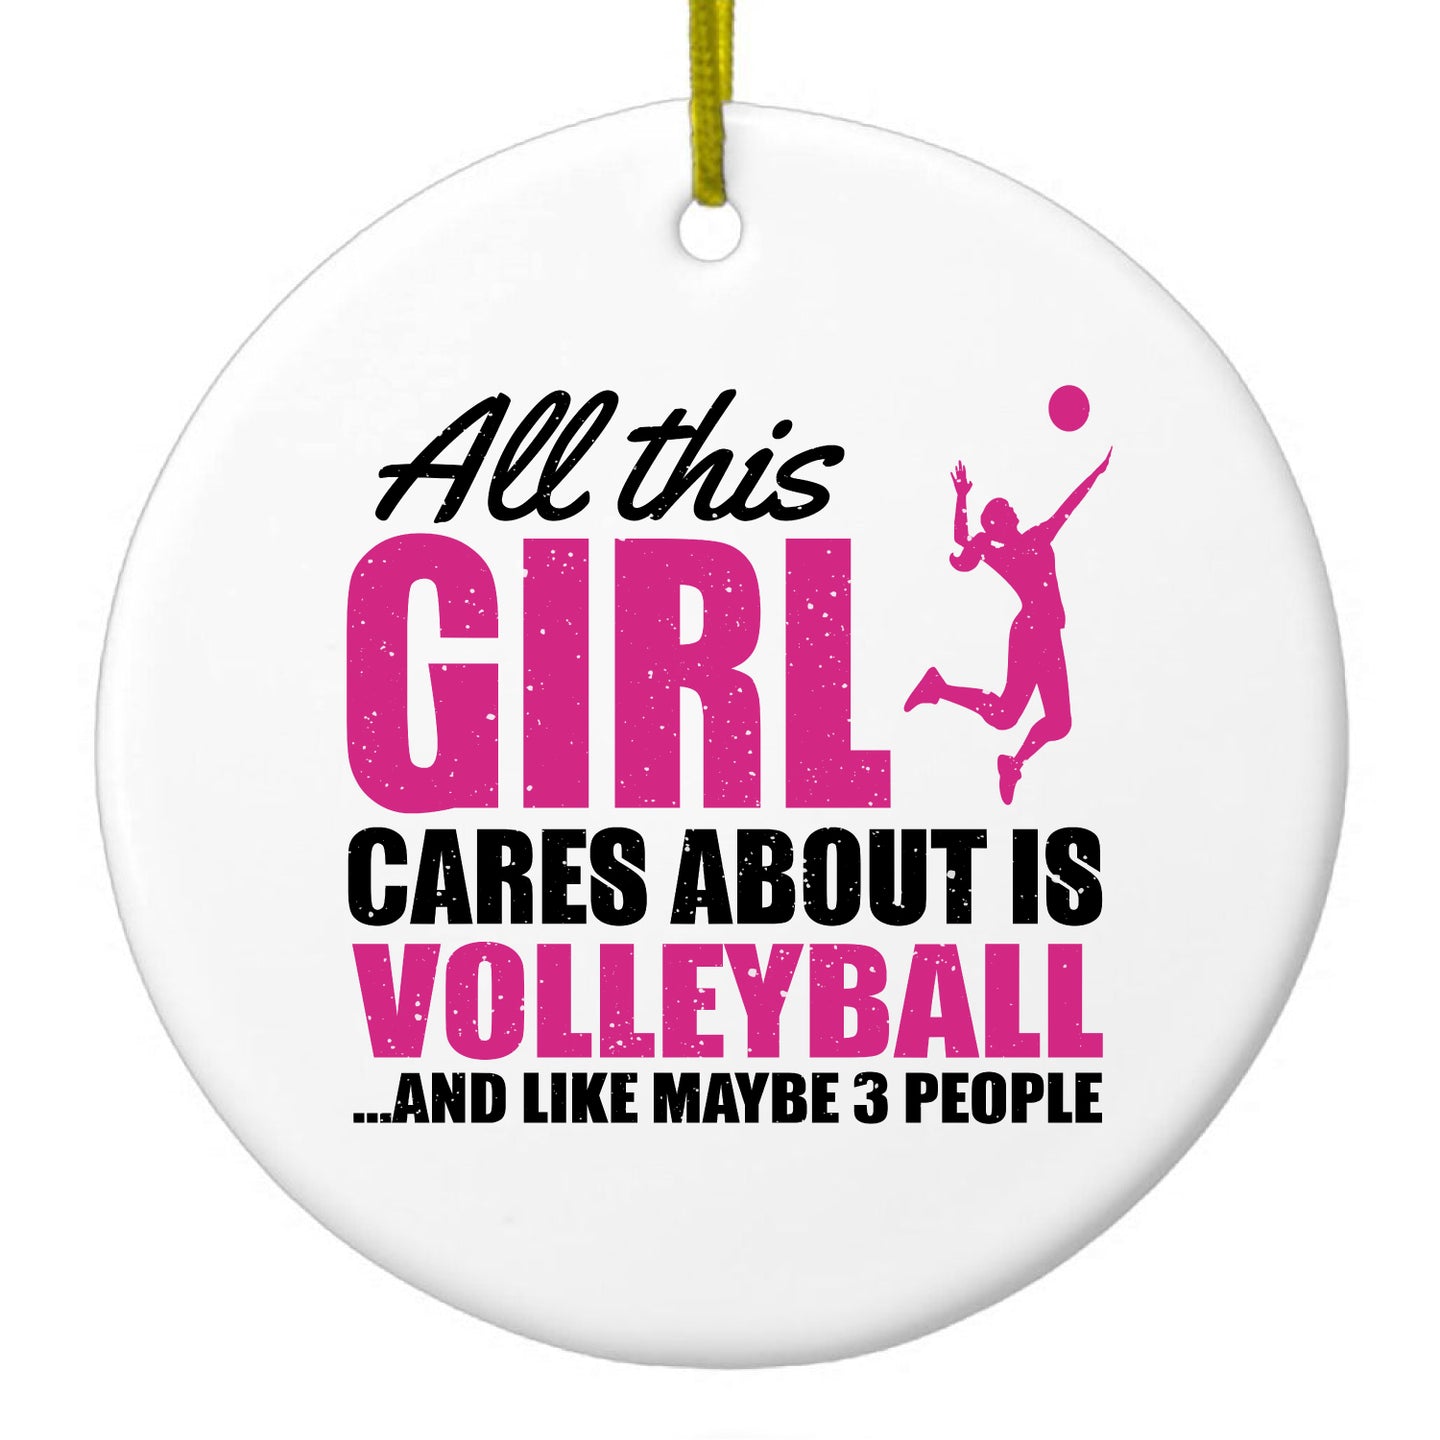 DistinctInk® Hanging Ceramic Christmas Tree Ornament with Gold String - Great Gift / Present - 2 3/4 inch Diameter - All This Girl Cares About is Volleyball